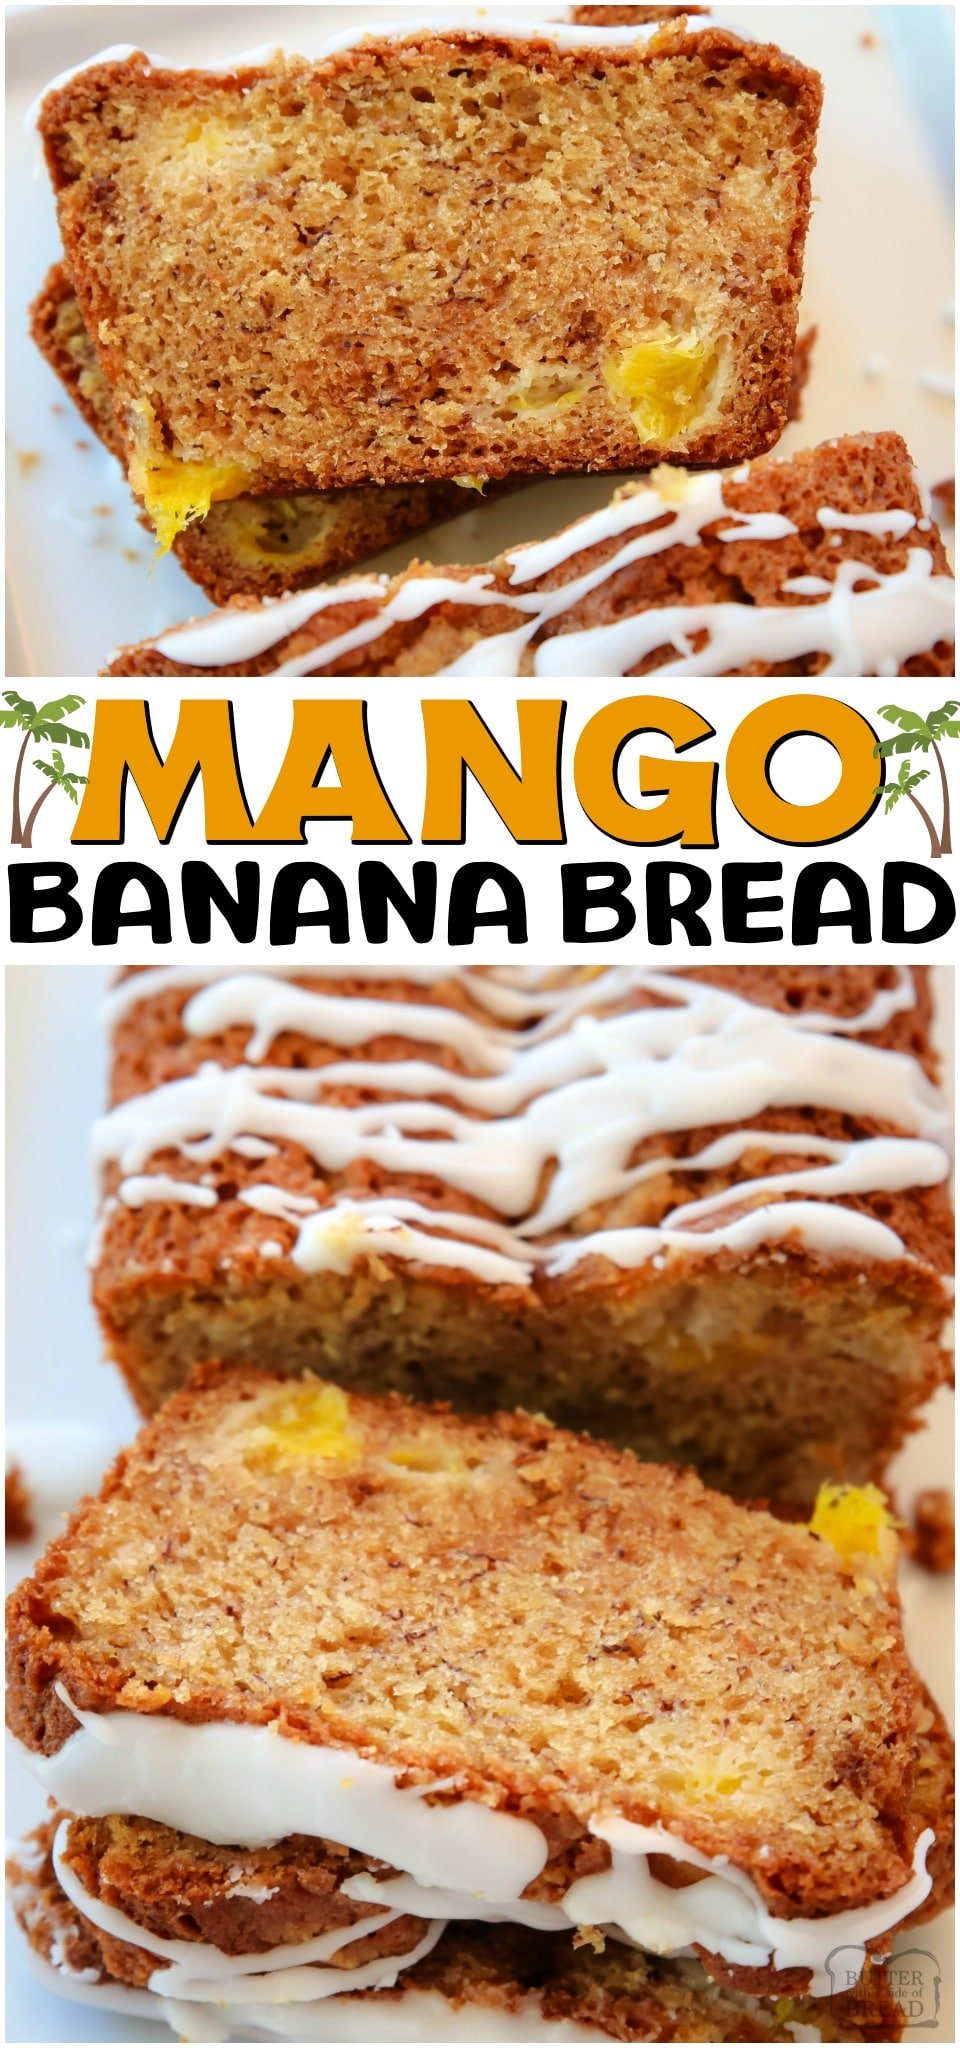 Mango Banana Bread made with ripe bananas and fresh mango, topped with a brown sugar streusel and drizzled with icing. A fantastic variation on a traditional banana bread recipe! #bread #banana #mango #baking #sweetbread #quickbread #recipe from BUTTER WITH A SIDE OF BREAD